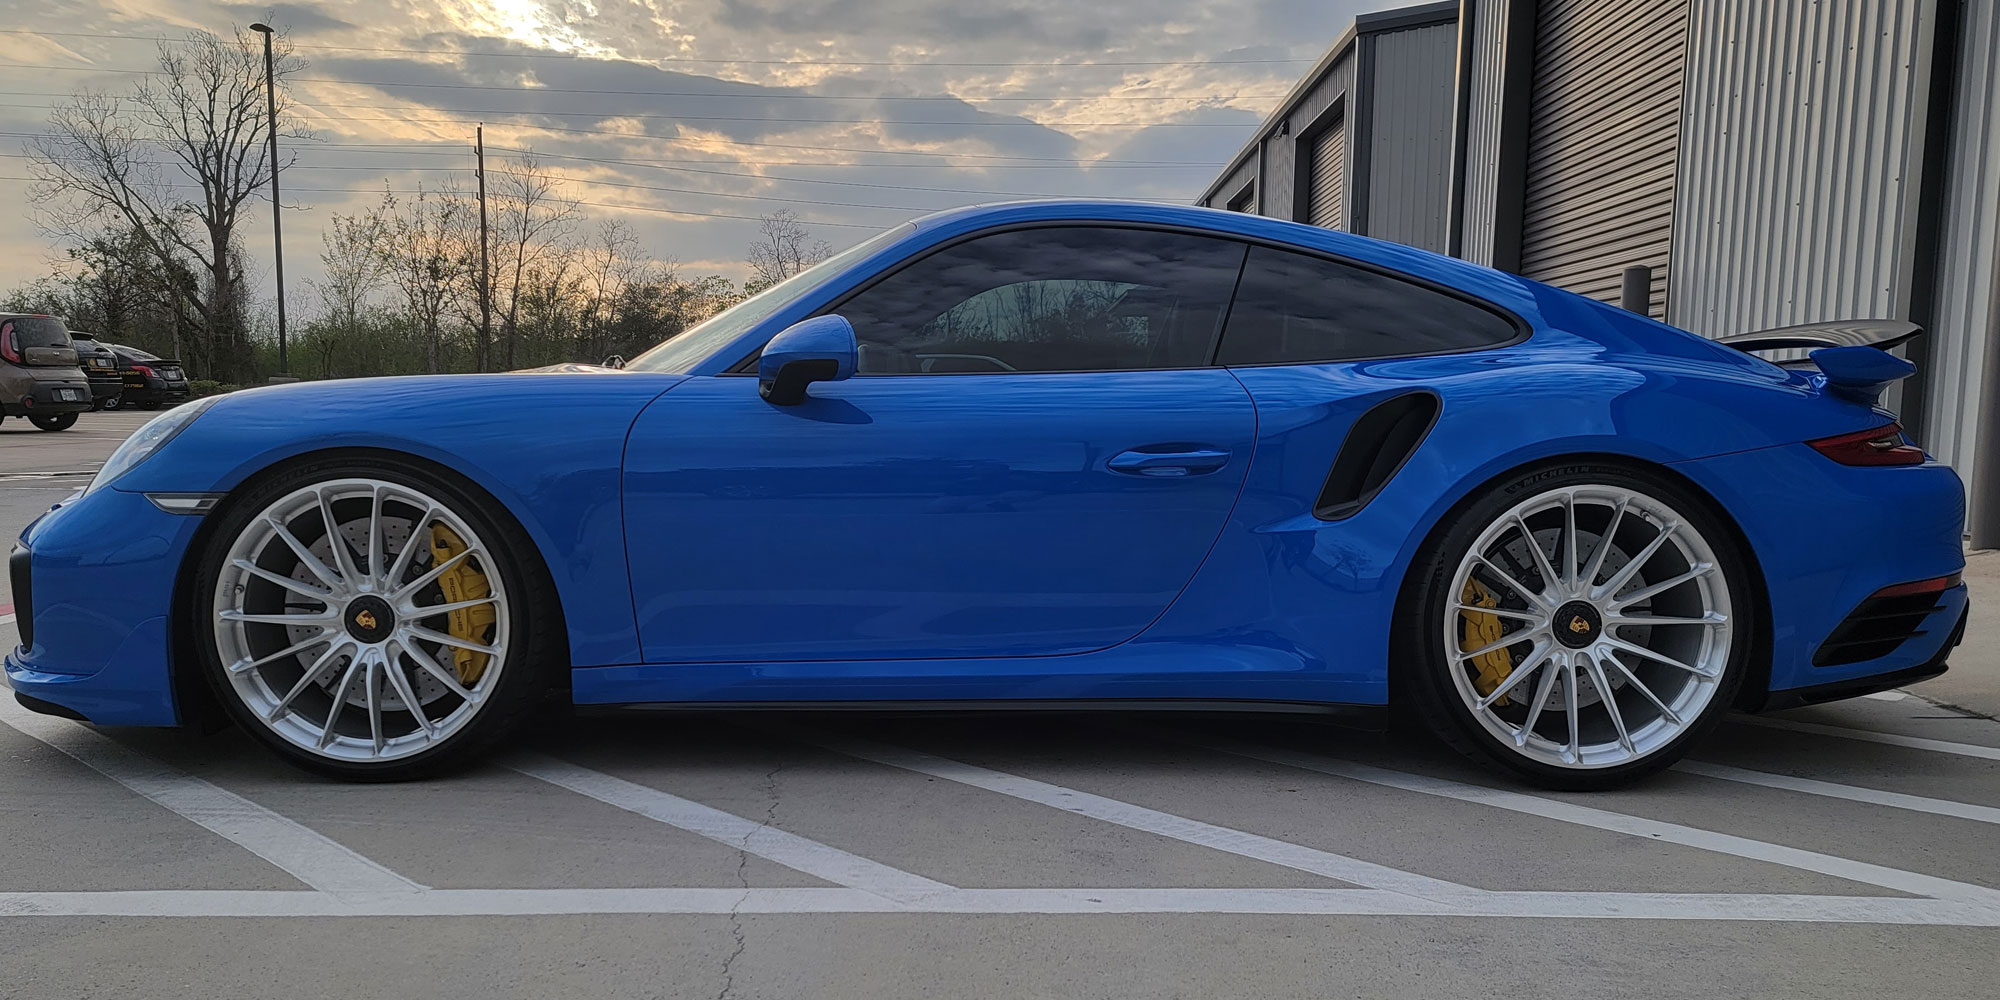 Nerd out on Porsche's extensive color catalog with the Rennbow